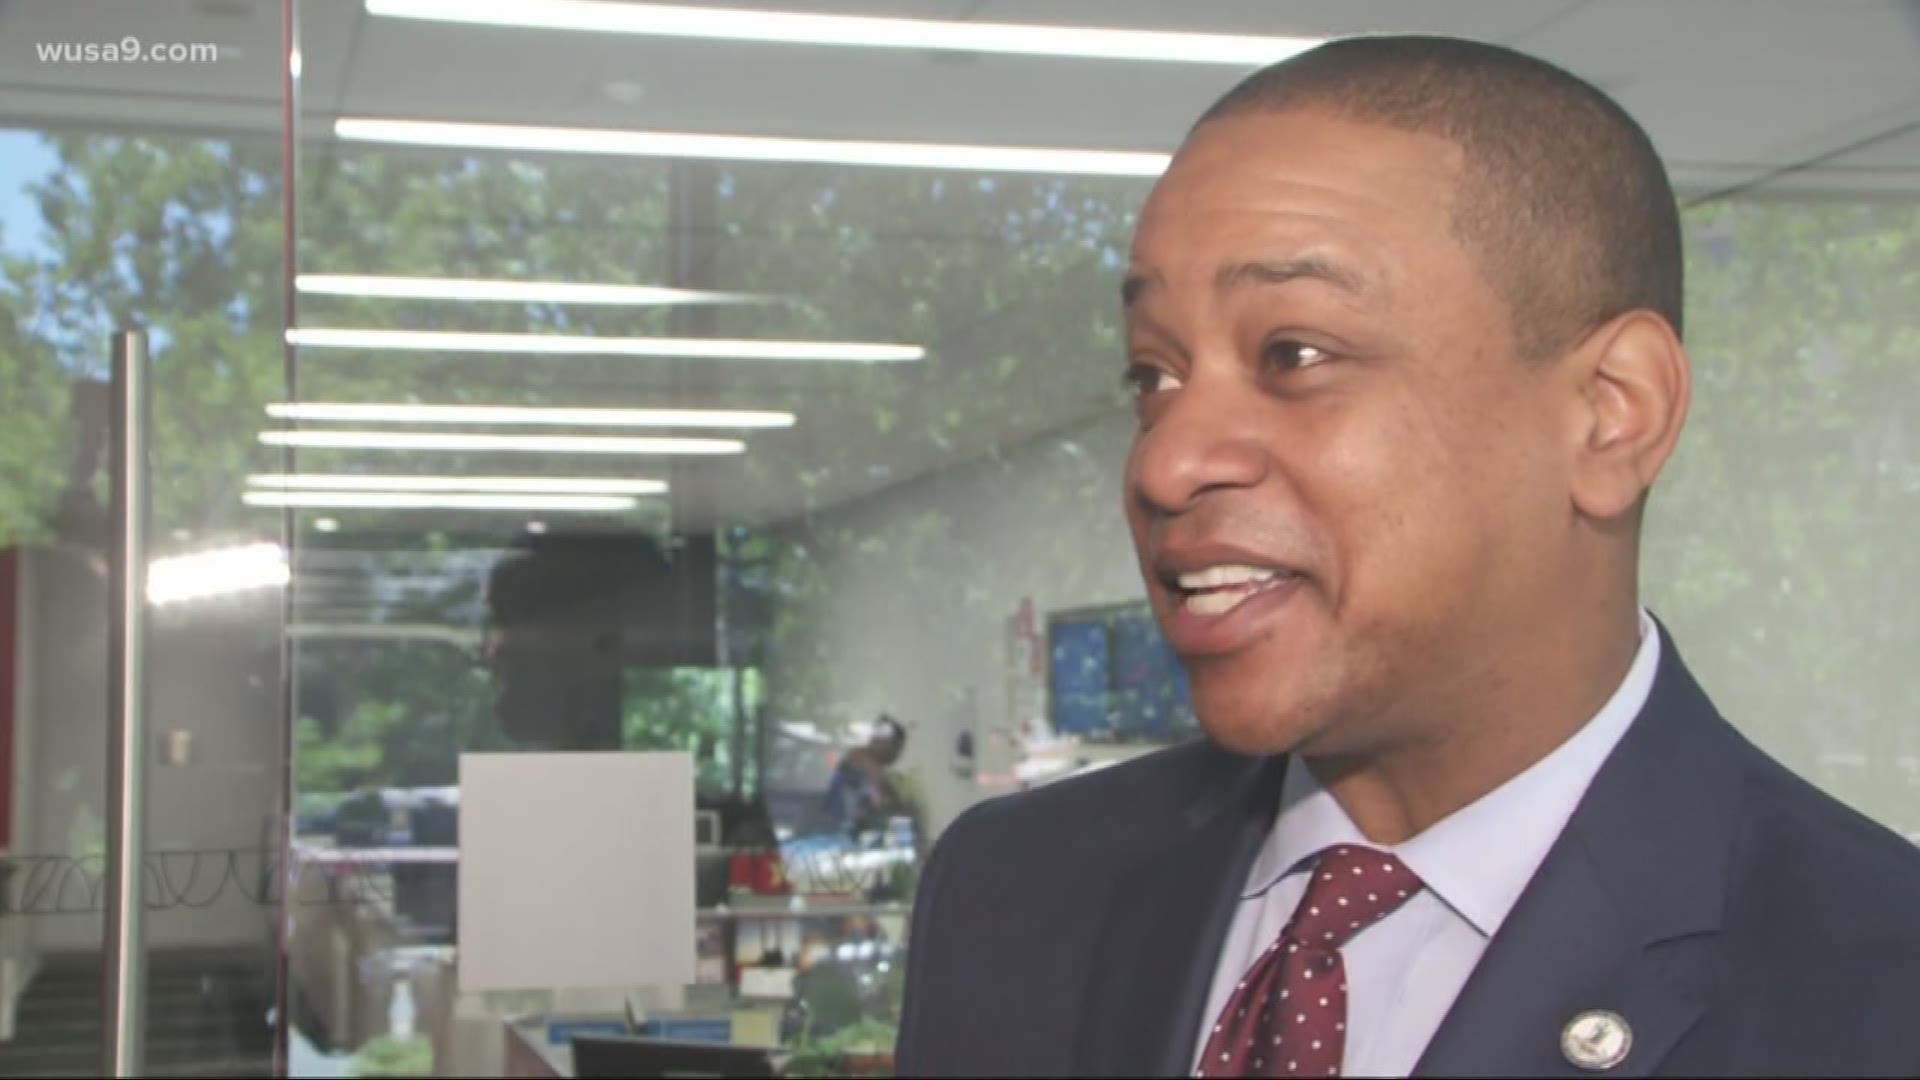 Despite two women's accusations that he sexually assaulted them, Lt. Gov. Justin Fairfax insists his support among Virginians is growing.